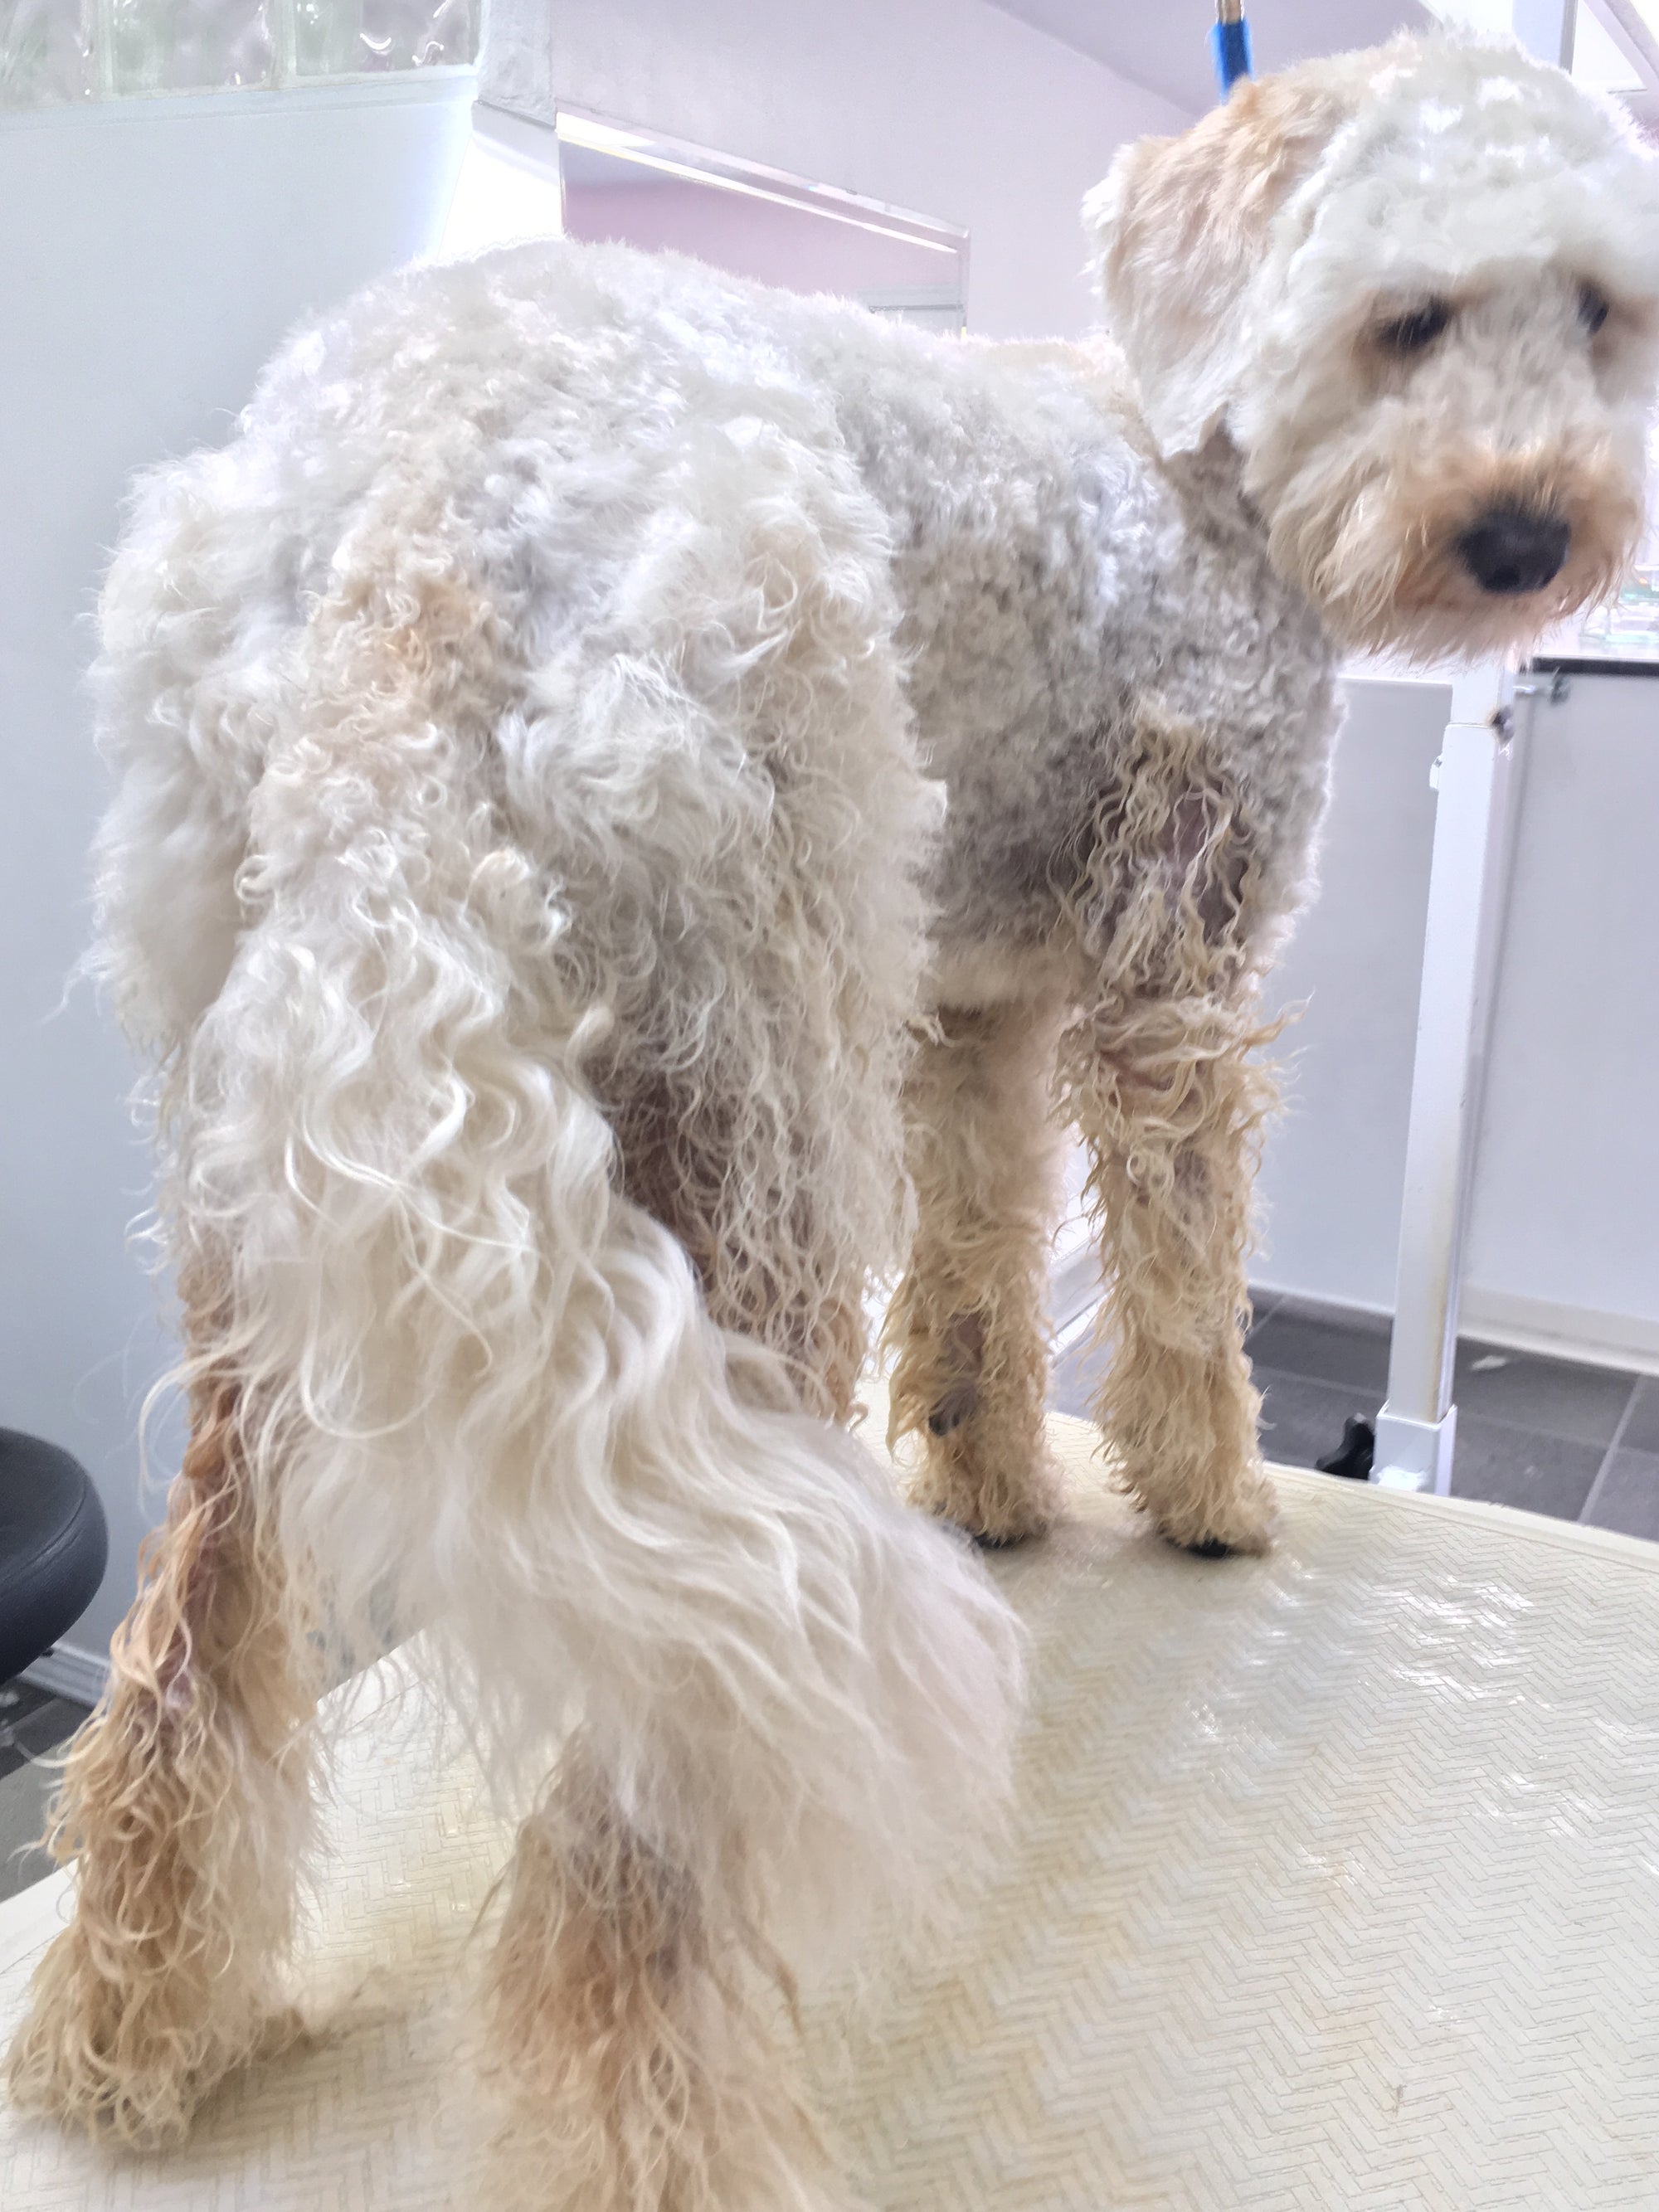 Still 'Grooming' Your Doodle before You take them to your Groomer?  :D!